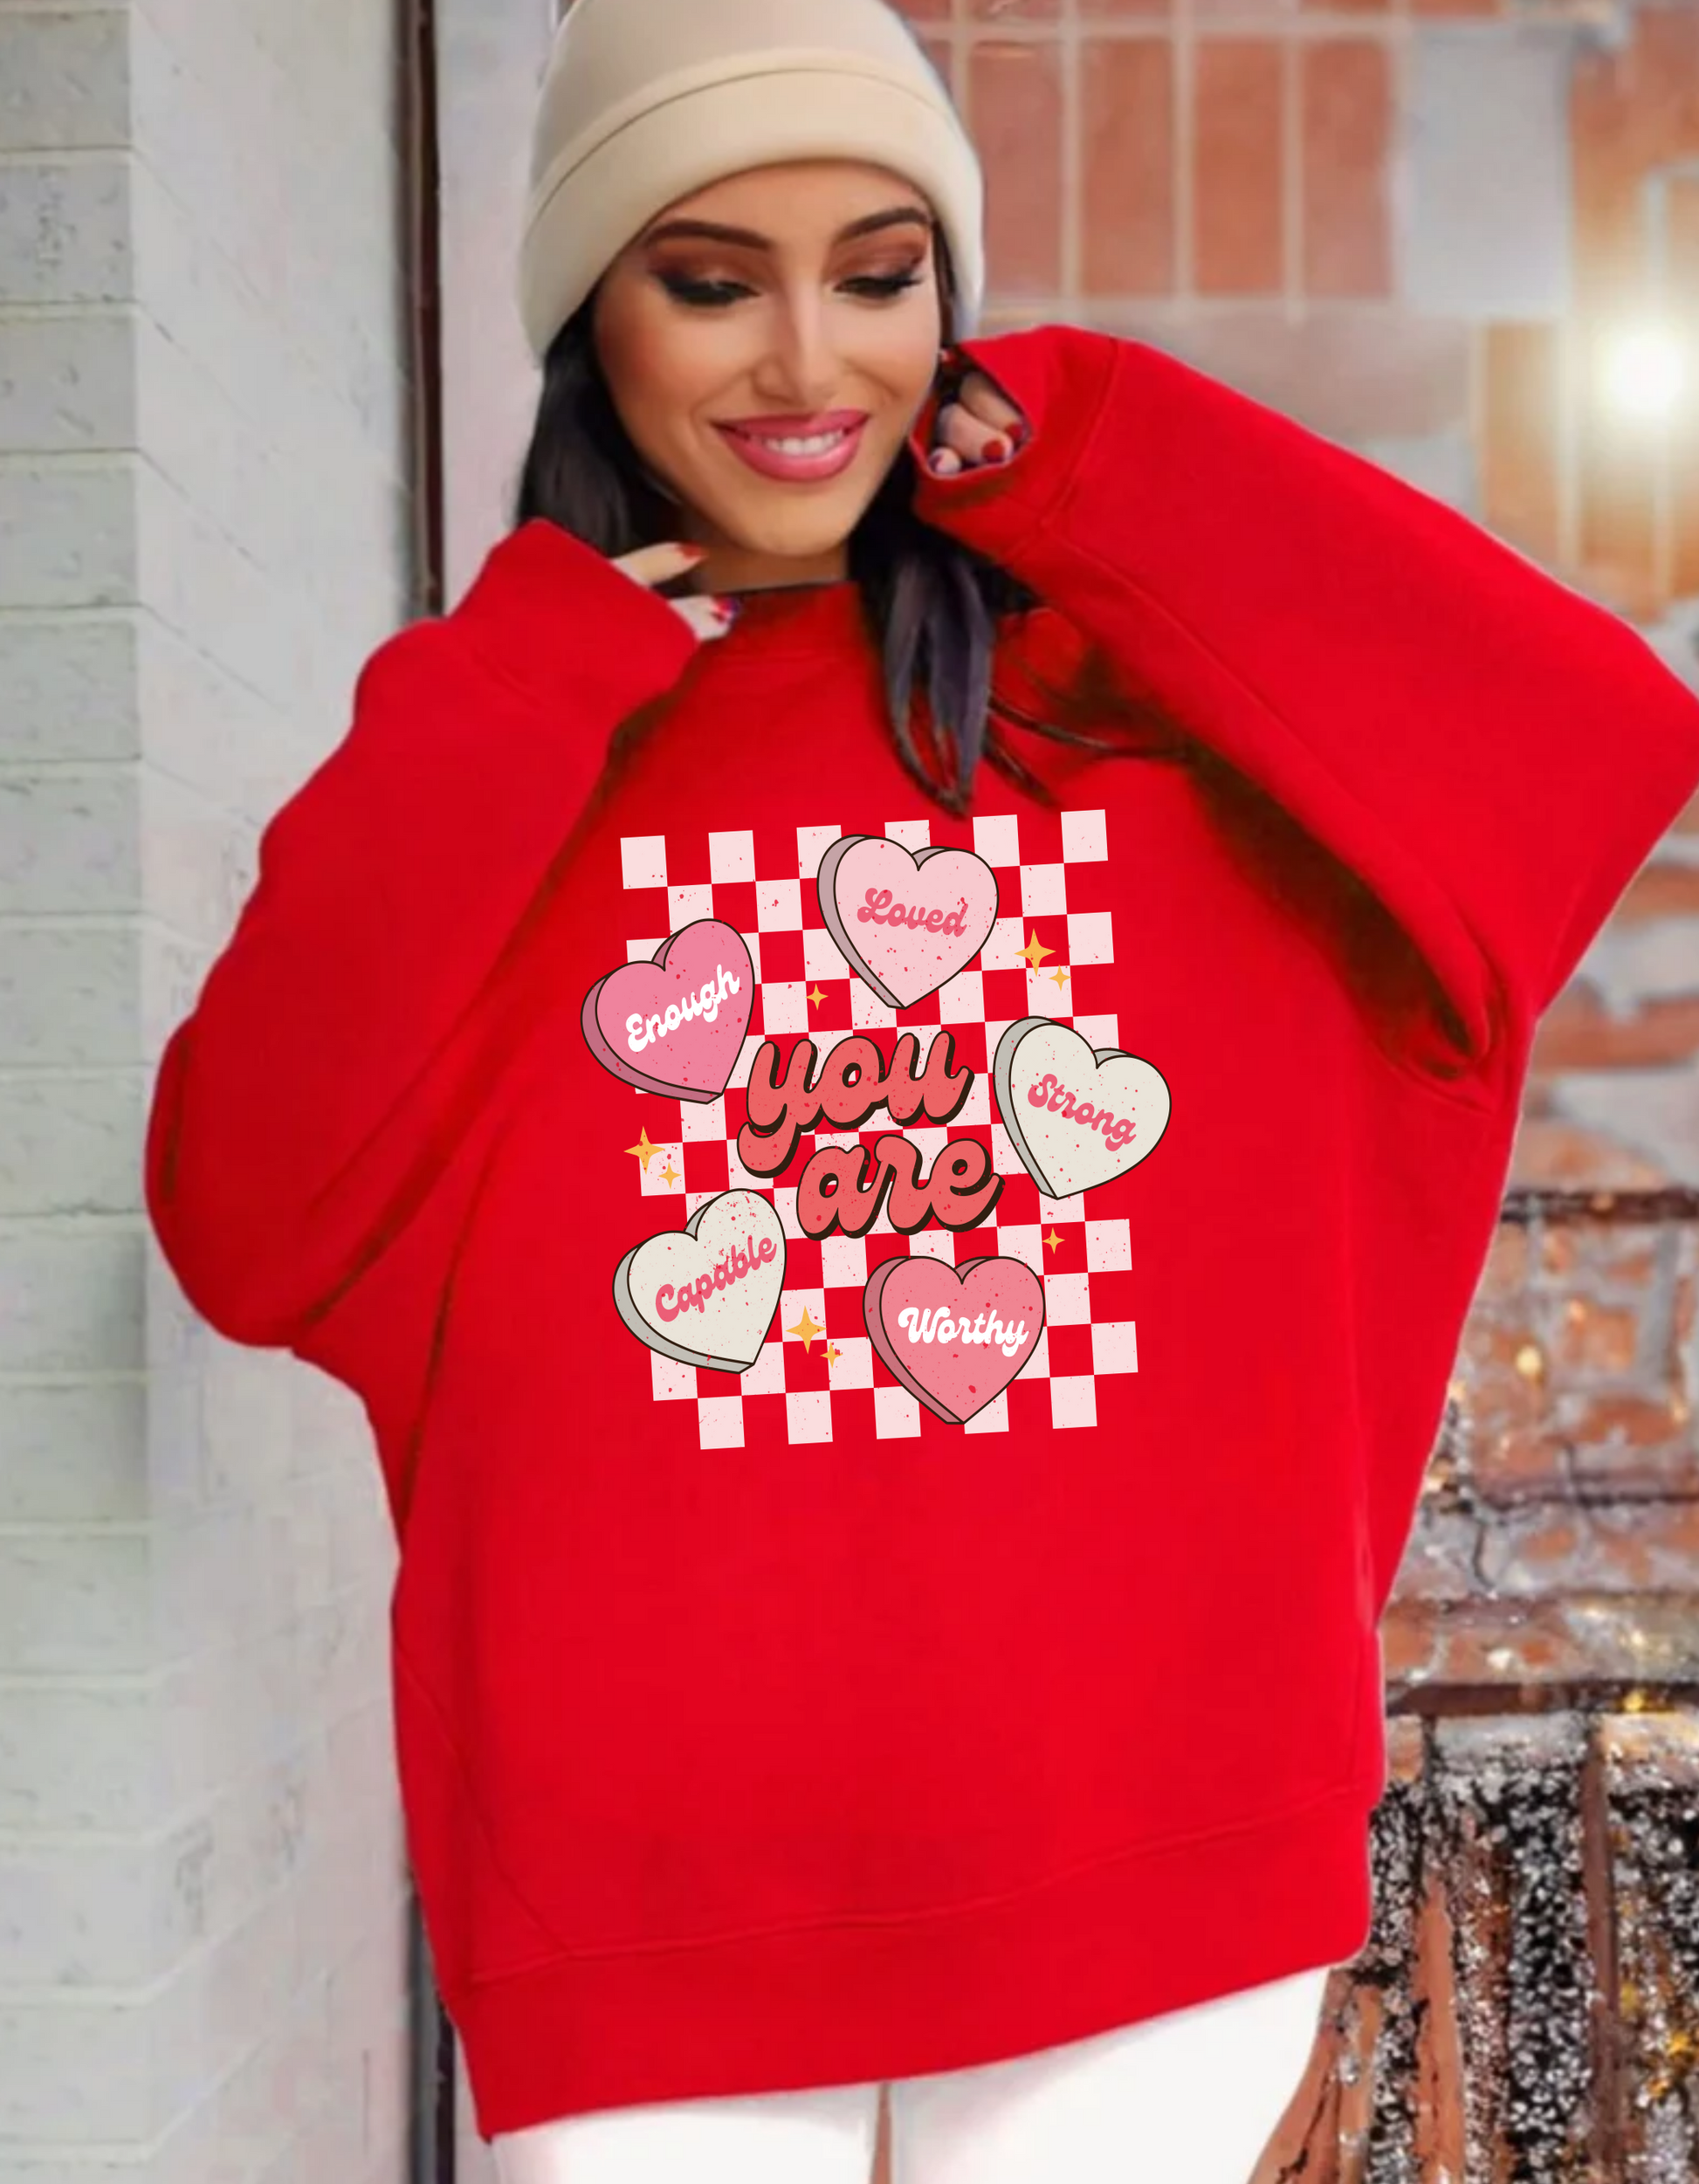 Valentine Candy Heart Sweatshirt, You are loved, enough, capable, strong and worthy.